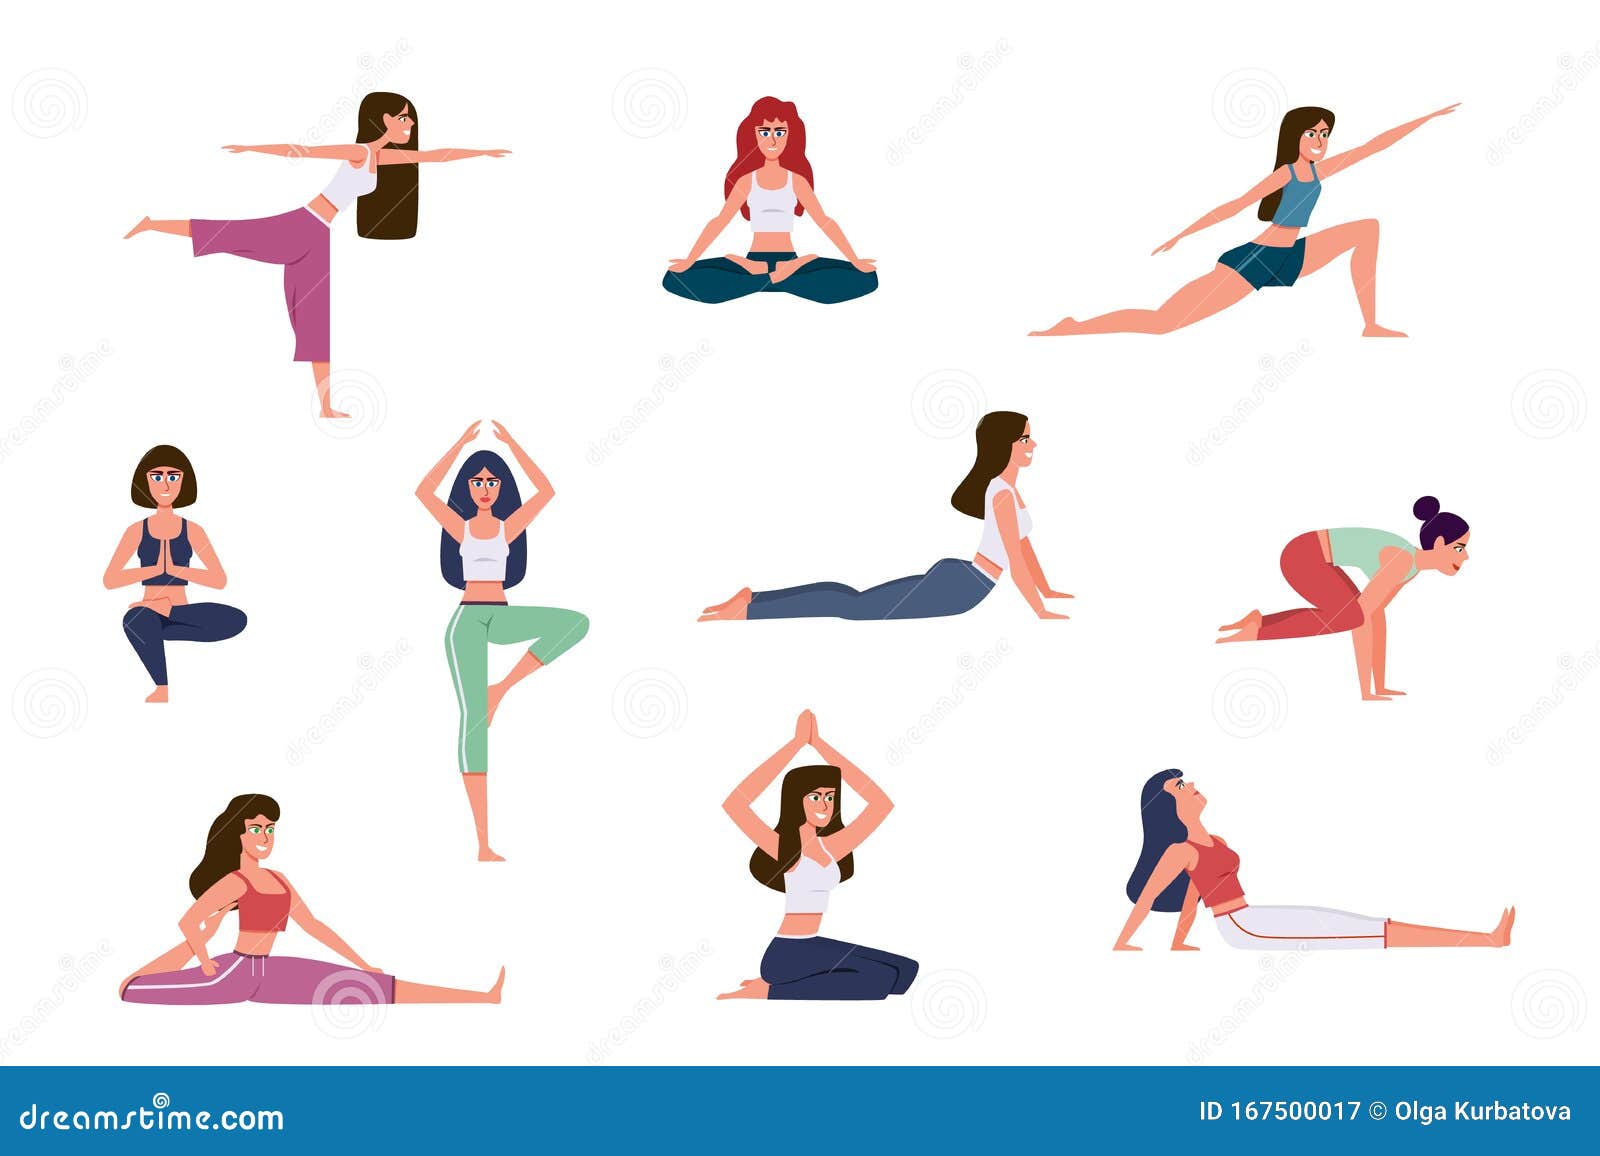 Stretching Cartoons, Illustrations & Vector Stock Images - 31421 ...